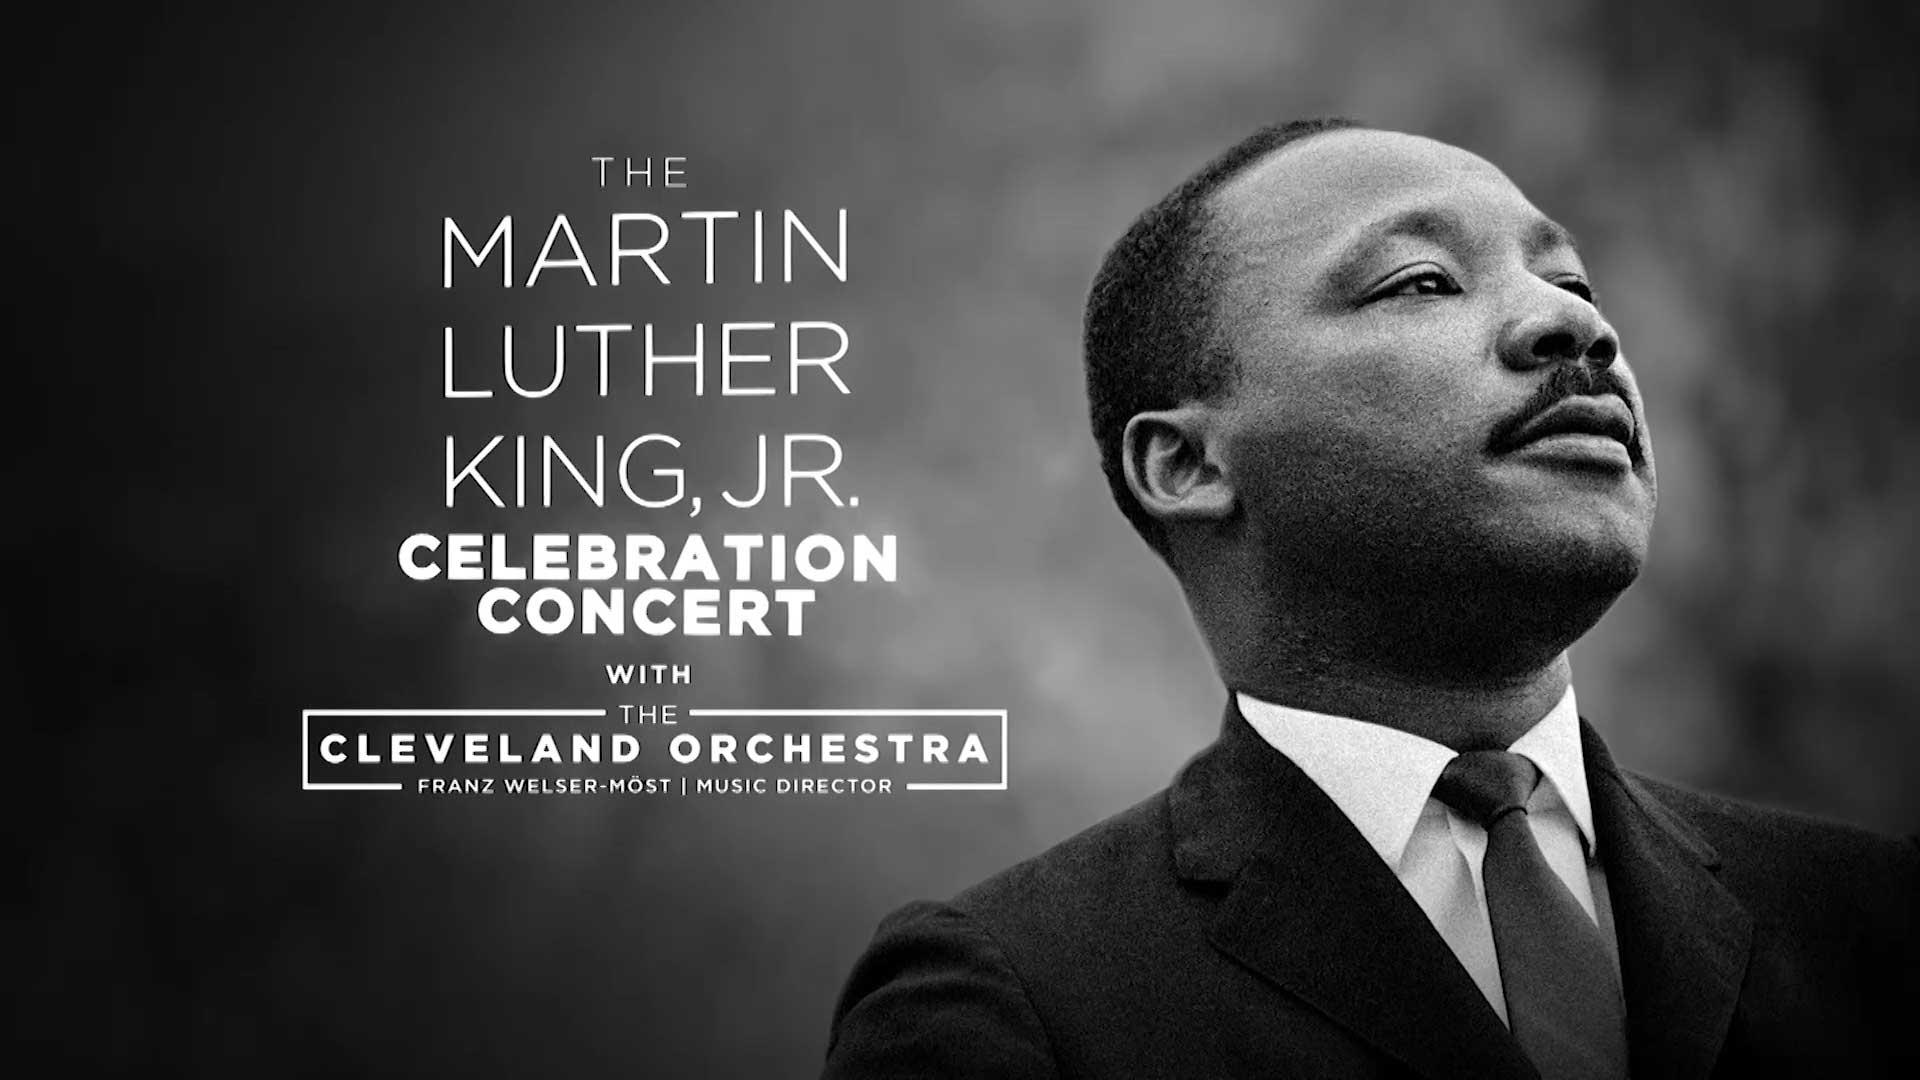 Martin Luther King, Jr., Celebration Concert with the Cleveland Orchestra